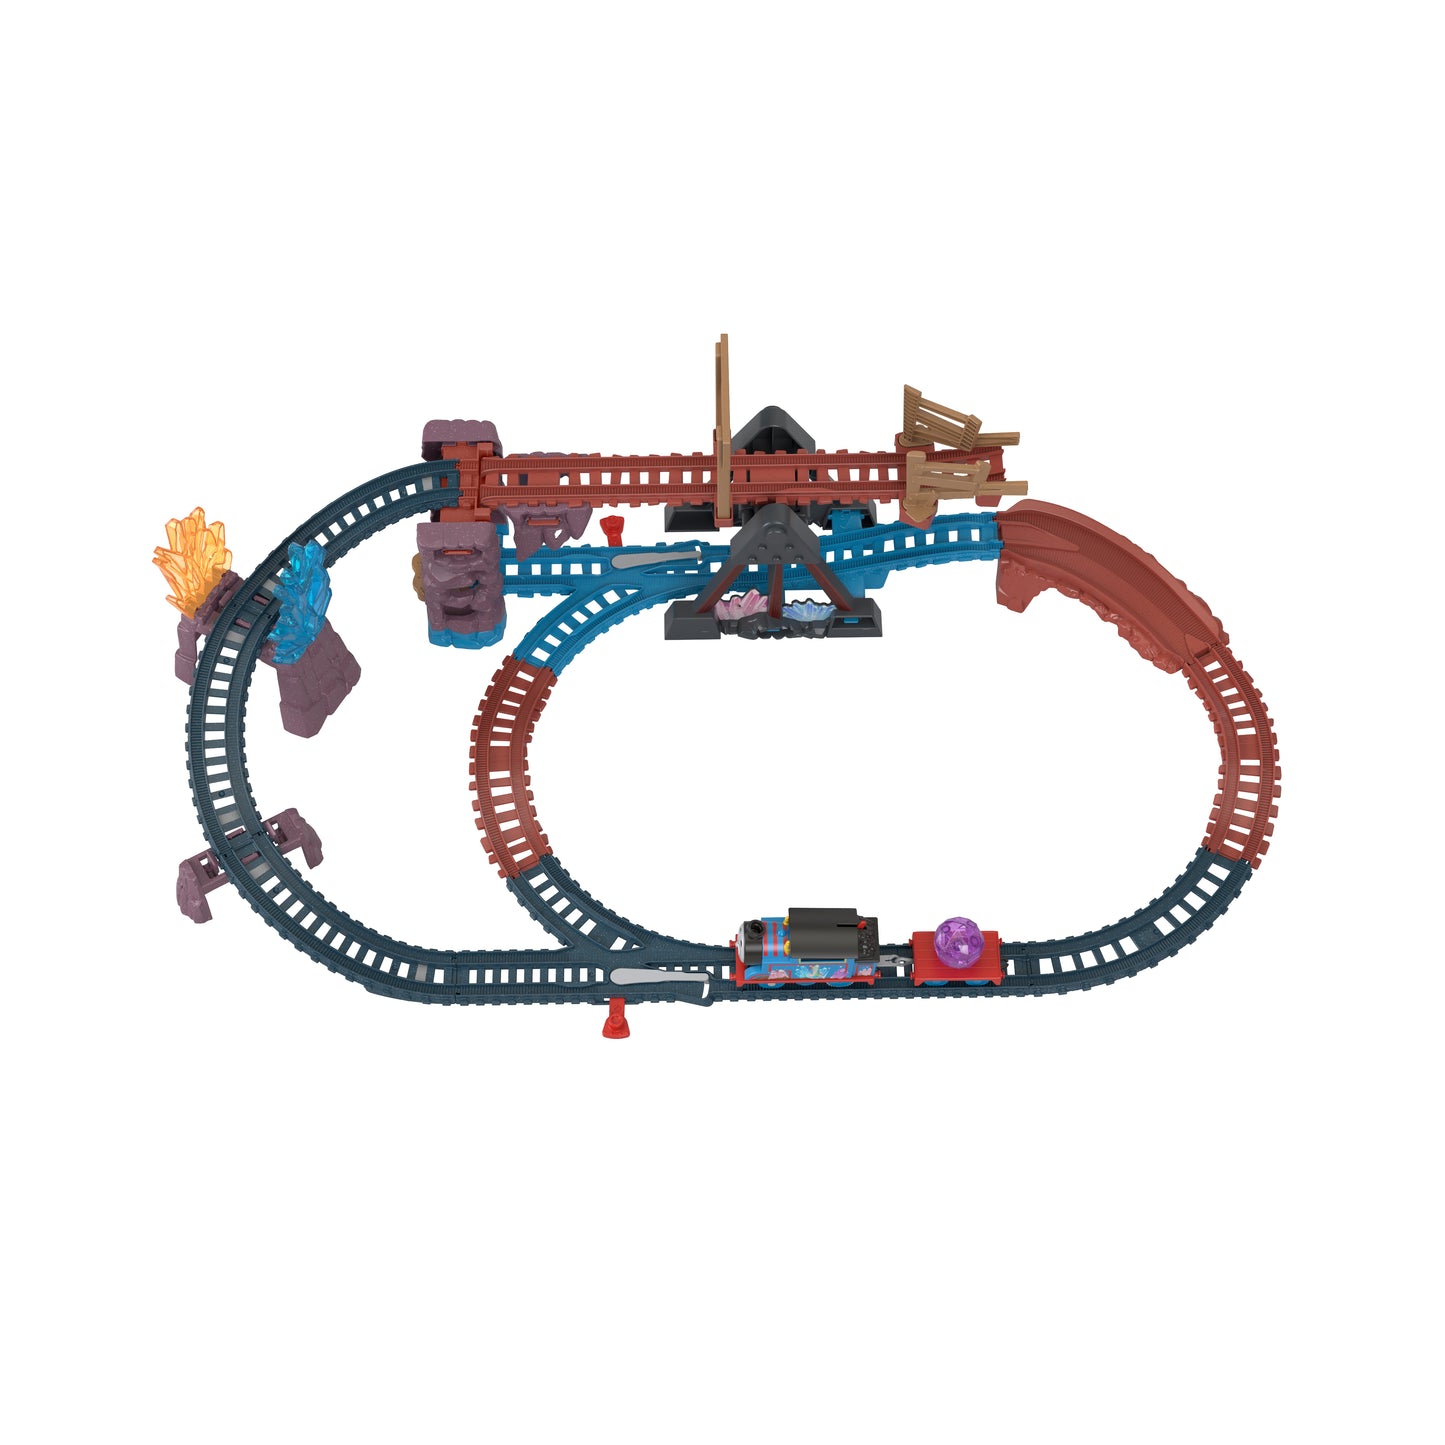 Fisher-Price Thomas & Friends Crystal Caves Adventure Set